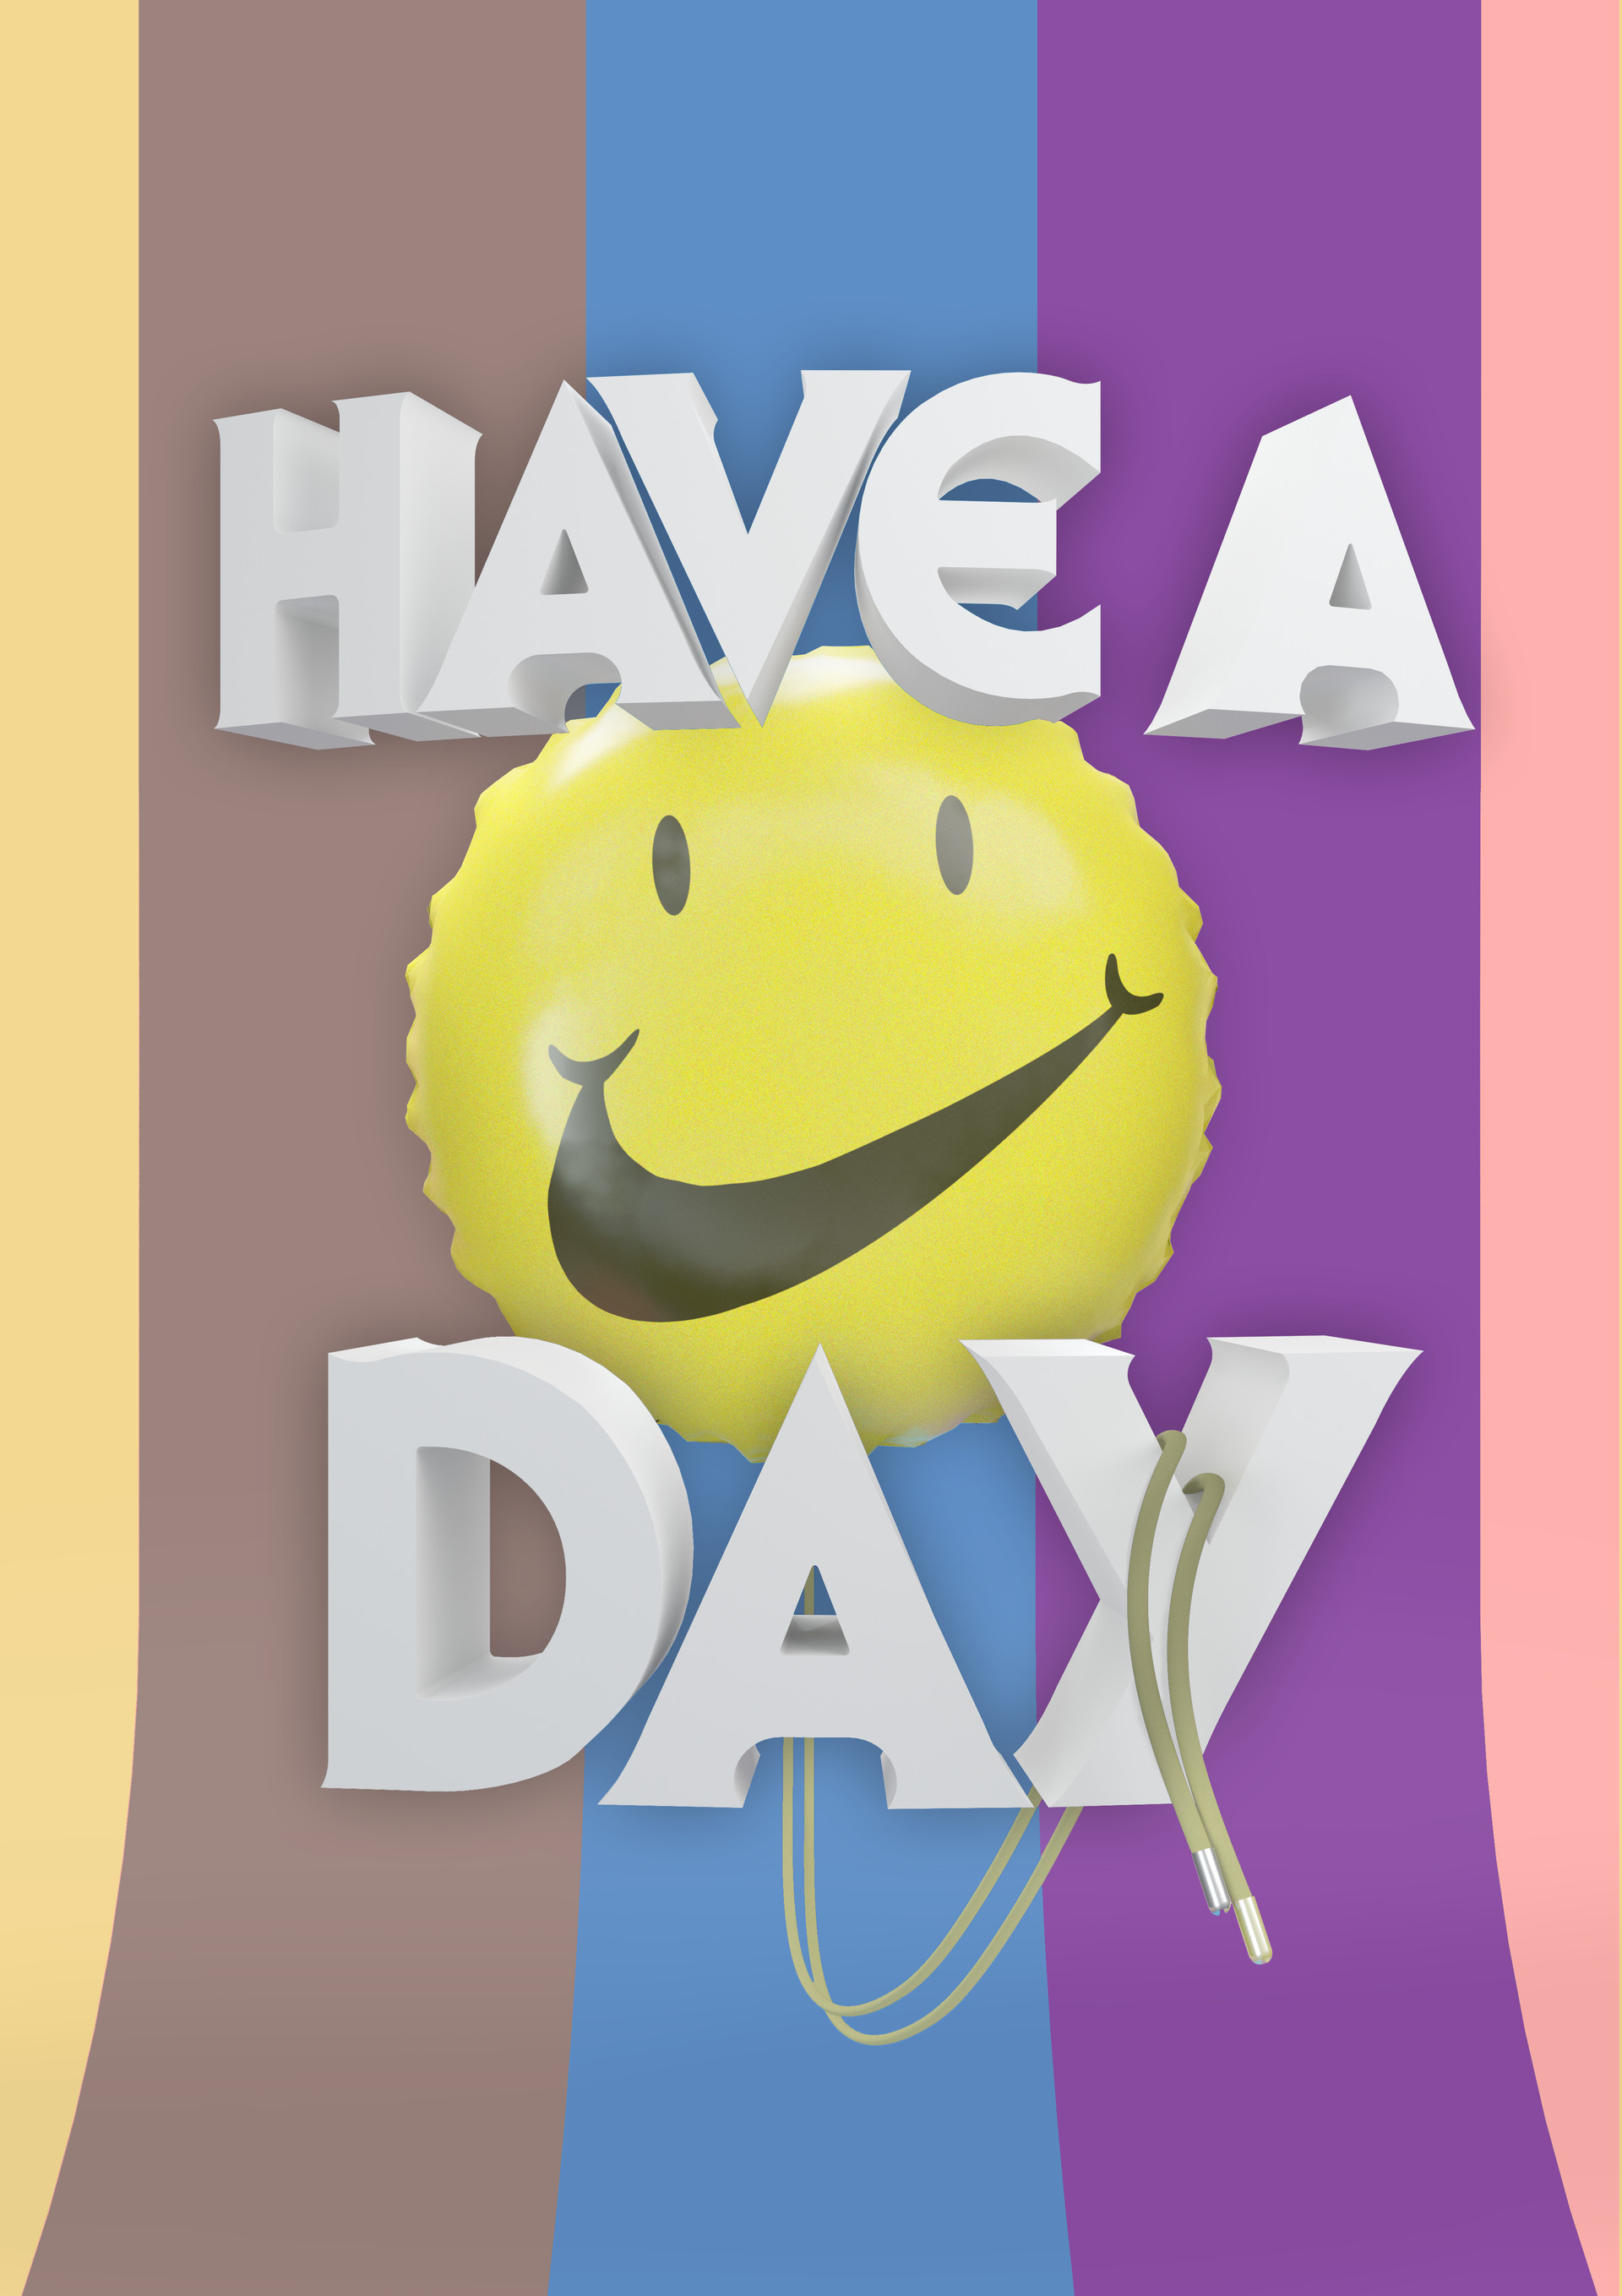 ArtStation - HAVE A NIKE DAY Typography